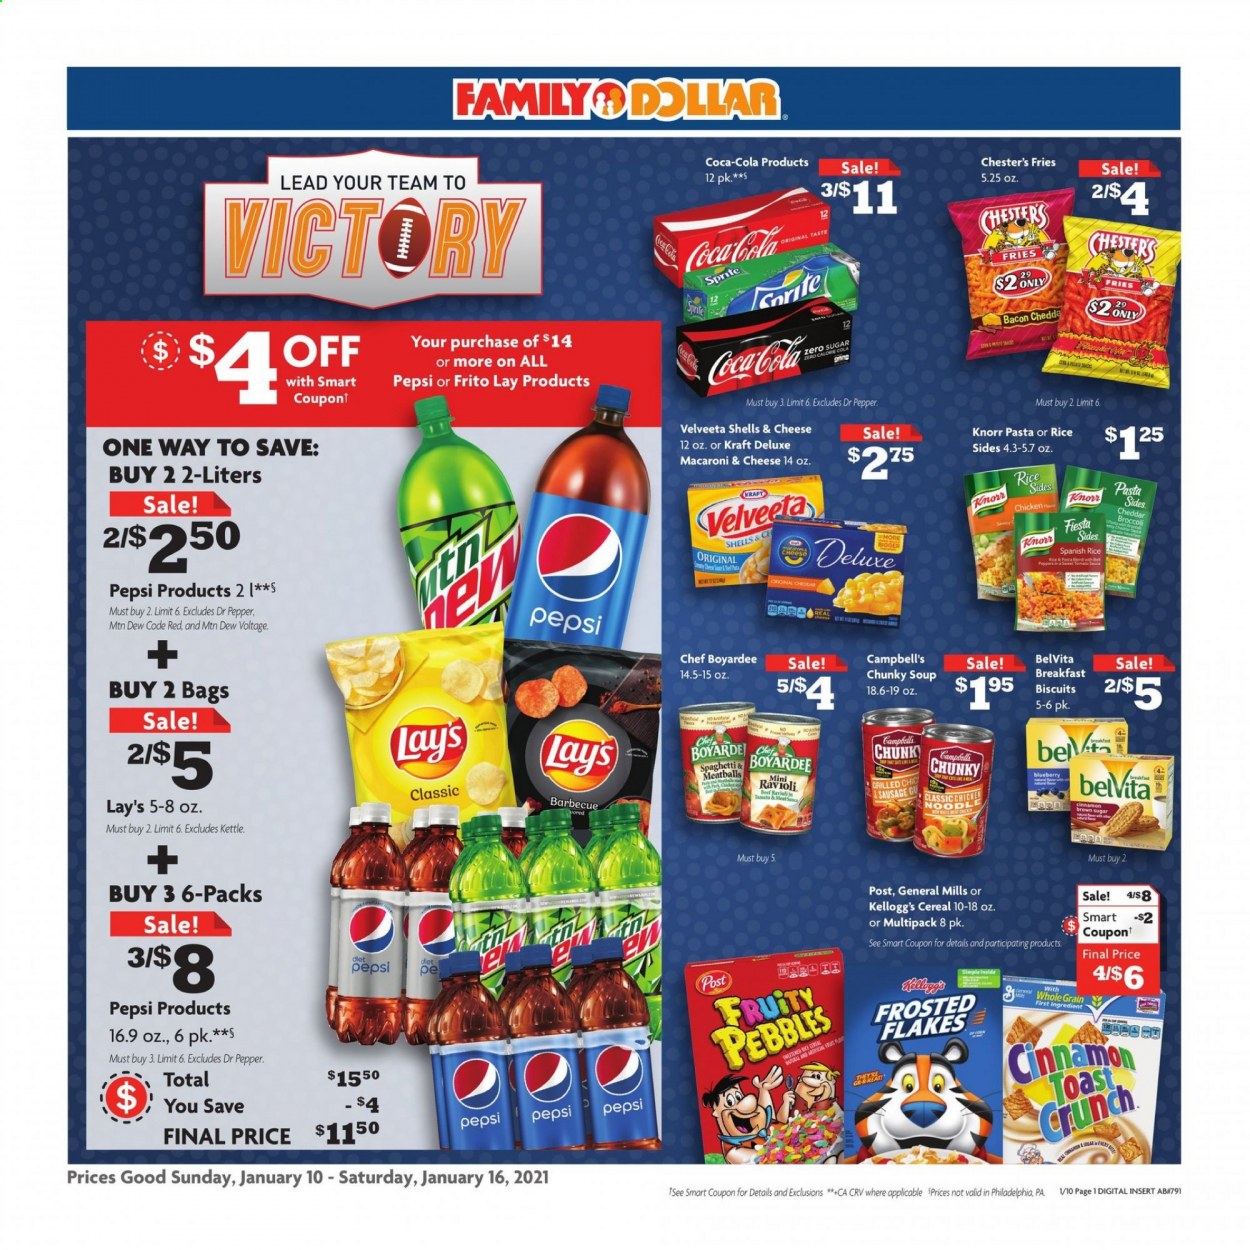 thumbnail - Family Dollar Flyer - 01/10/2021 - 01/16/2021 - Sales products - toast bread, Campbell's, macaroni & cheese, meatballs, soup, Knorr, sauce, pasta sides, Kraft®, bacon, sausage, Philadelphia, cheddar, potato fries, Kellogg's, biscuit, Lay’s, cane sugar, Chef Boyardee, cereals, Frosted Flakes, belVita, ravioli, rice, spaghetti, pasta, noodles, cinnamon, Coca-Cola, Mountain Dew, Sprite, Pepsi, Dr. Pepper, Coca-Cola zero. Page 1.